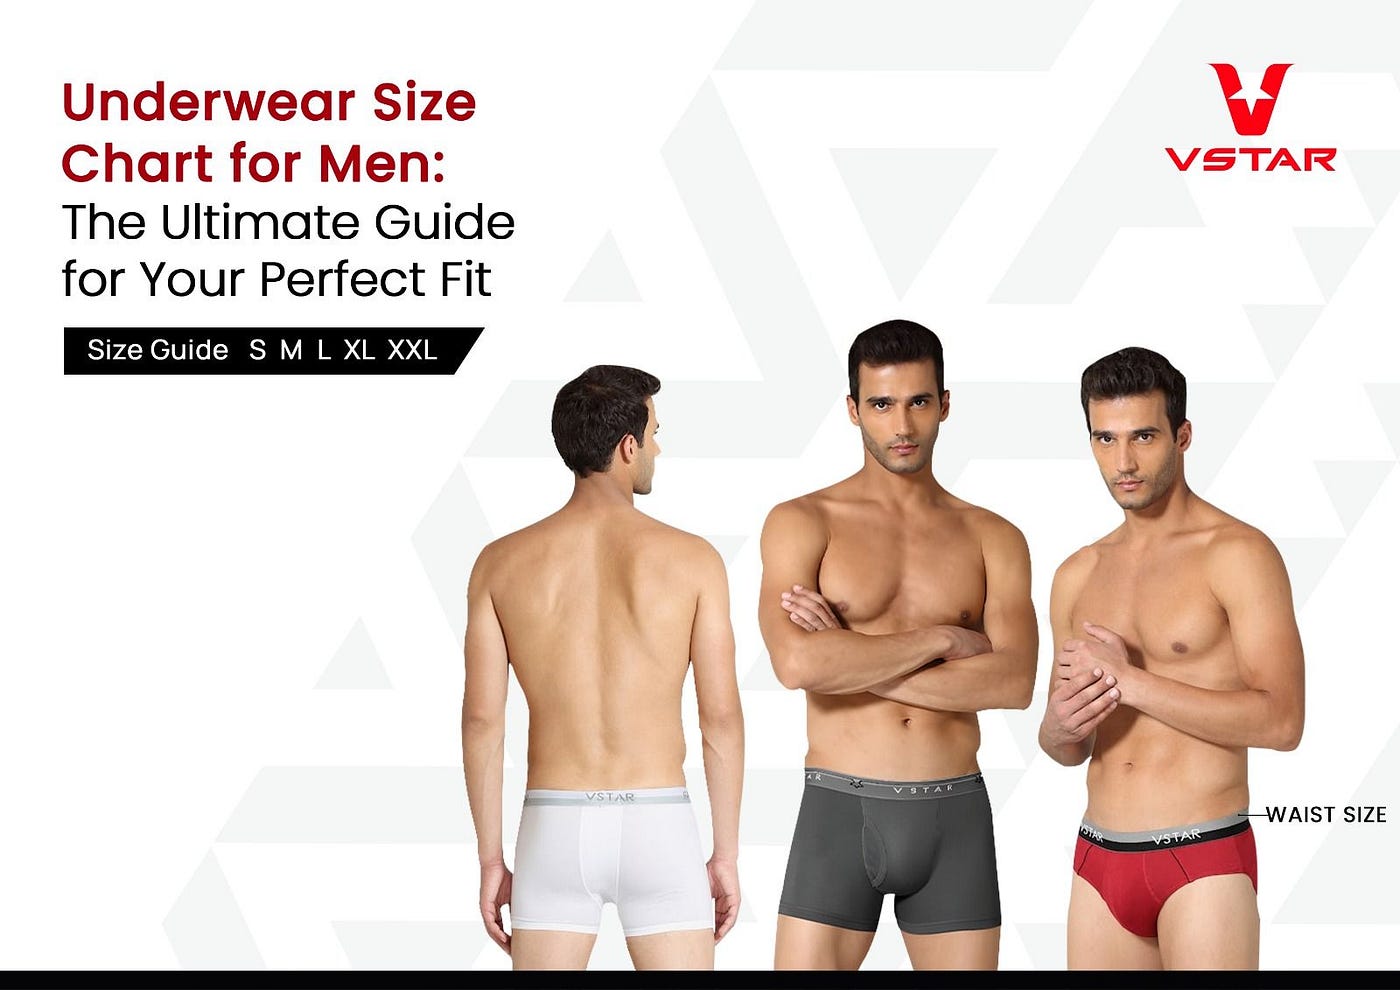 How to Wear Men's Underwear: The Ultimate Guide